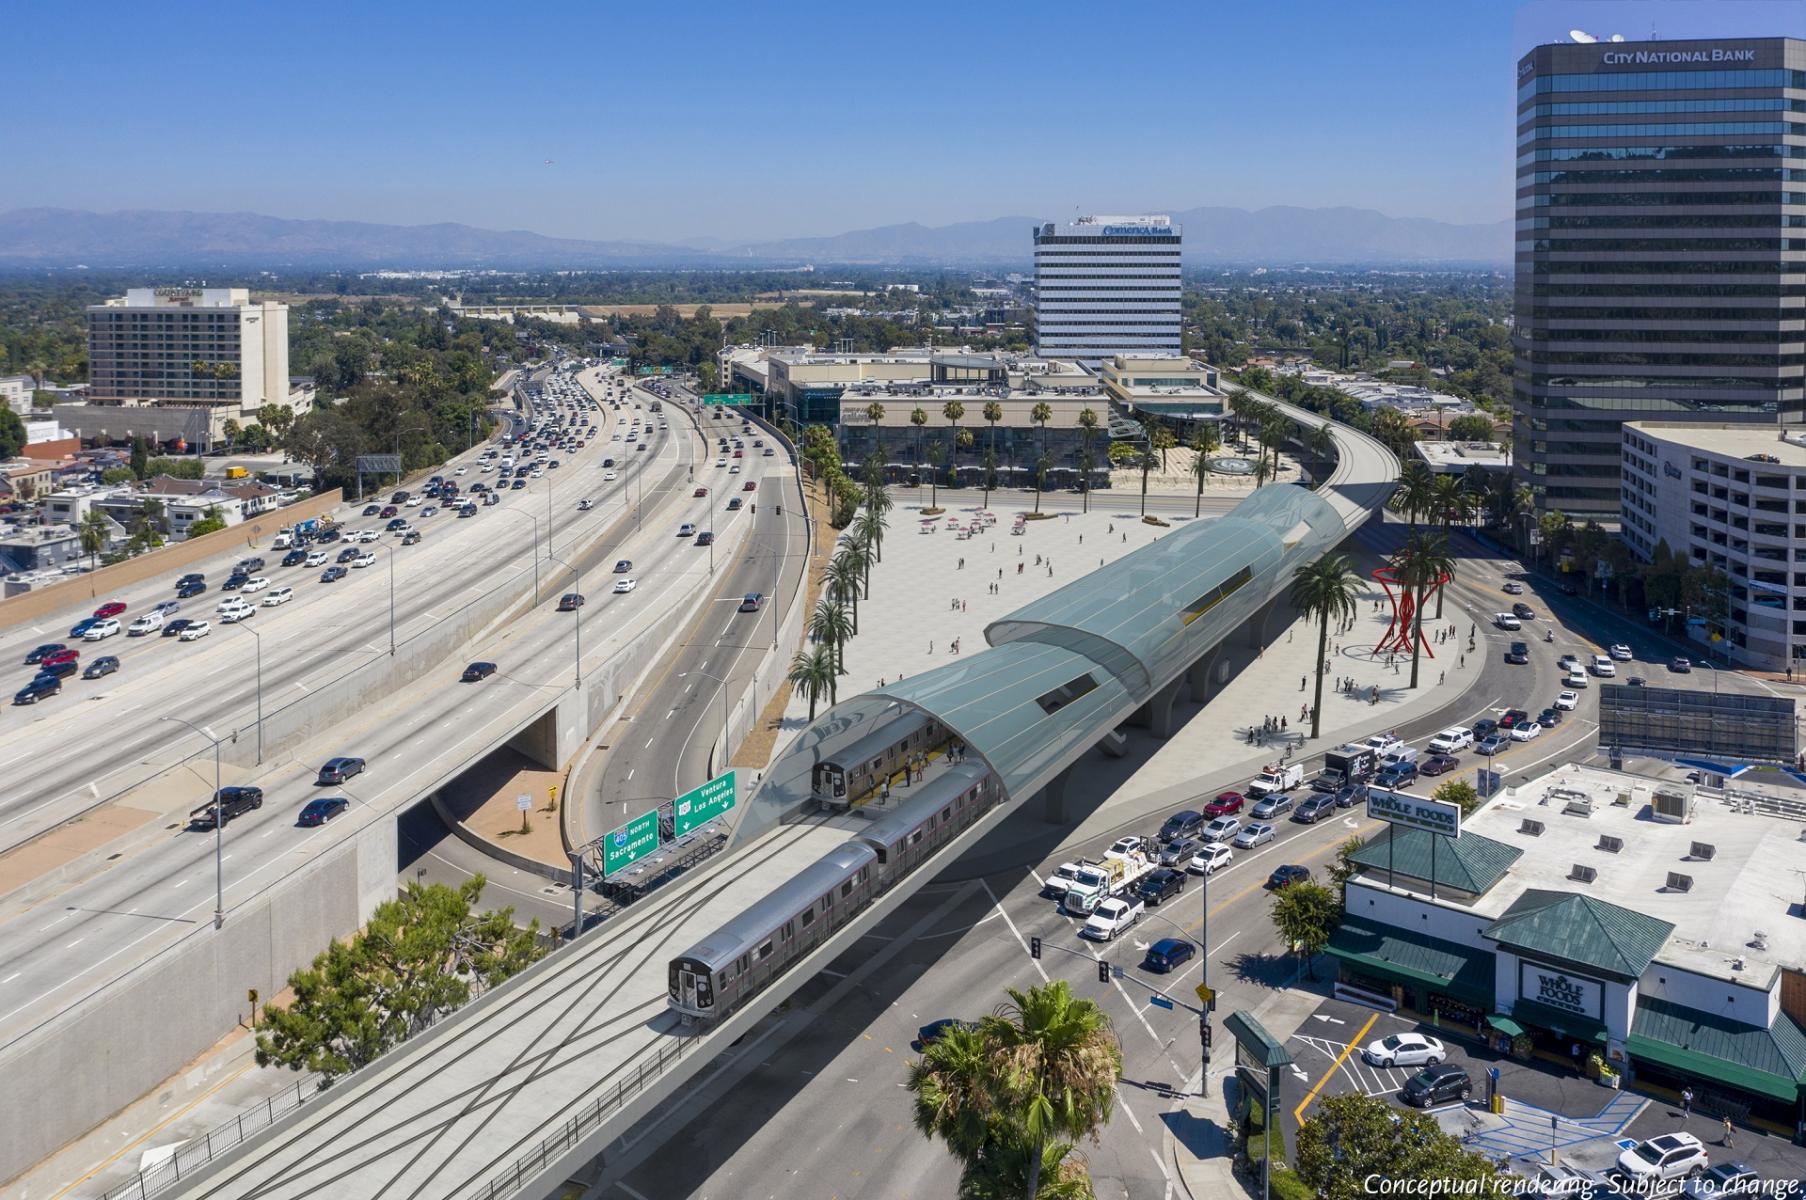 The ghosts of L.A.'s unbuilt freeways - Los Angeles Times